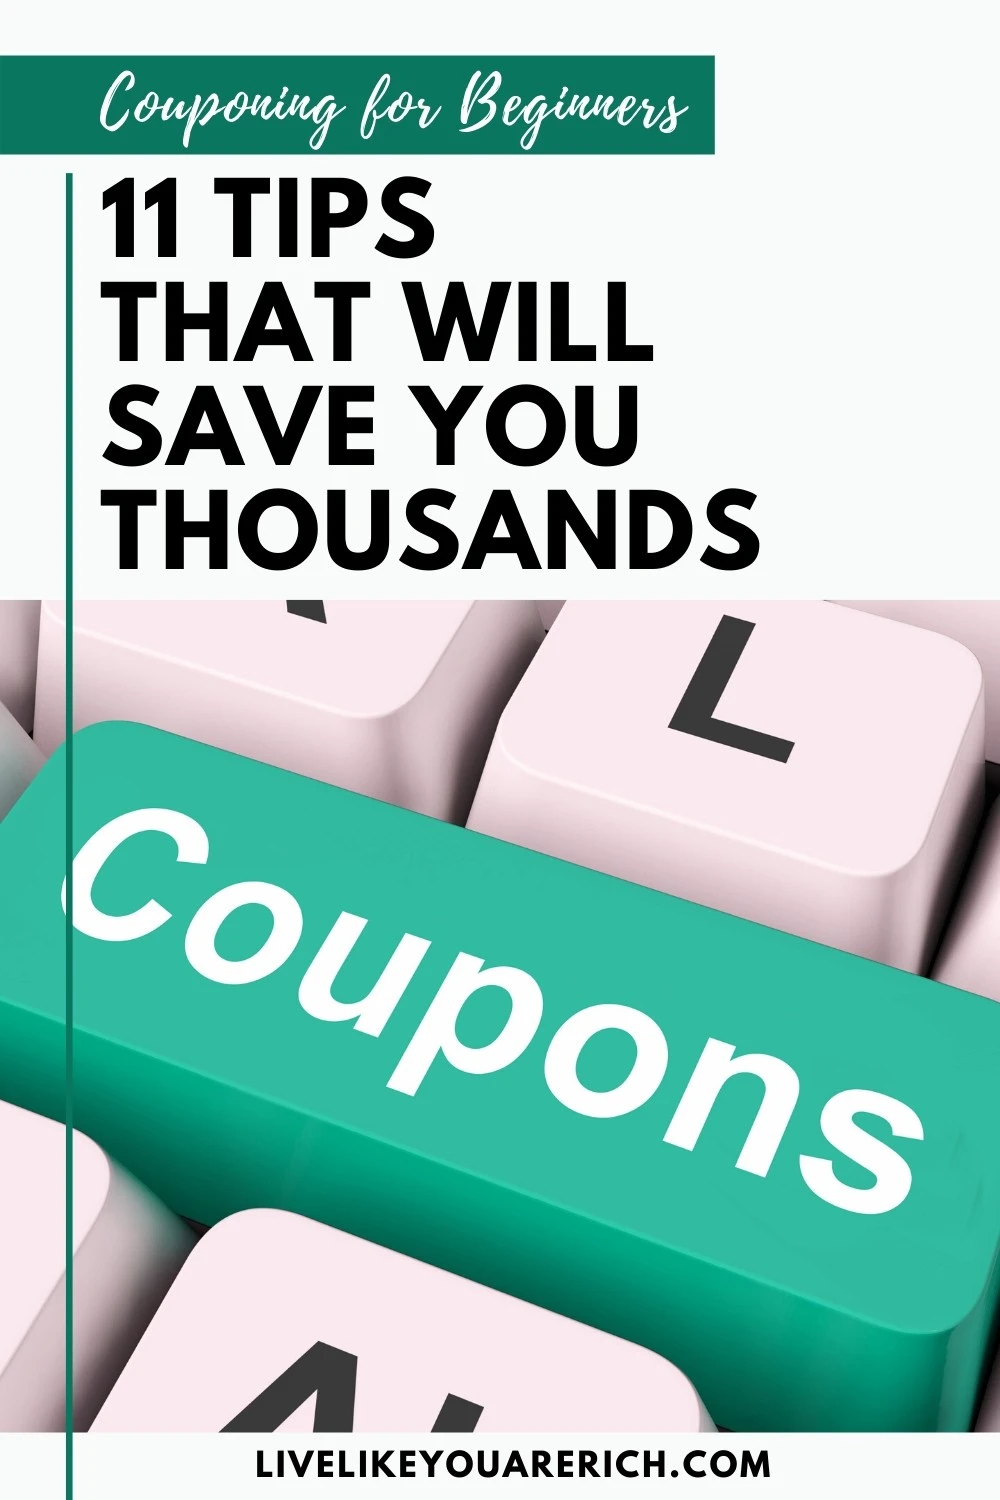 I have been couponing for over a decade. I have saved over $25,000 couponing (over $250/month). If you haven't gotten into couponing, now is a great time. I’m sharing my 11 tips on how to start couponing for beginners that will save you thousands. 